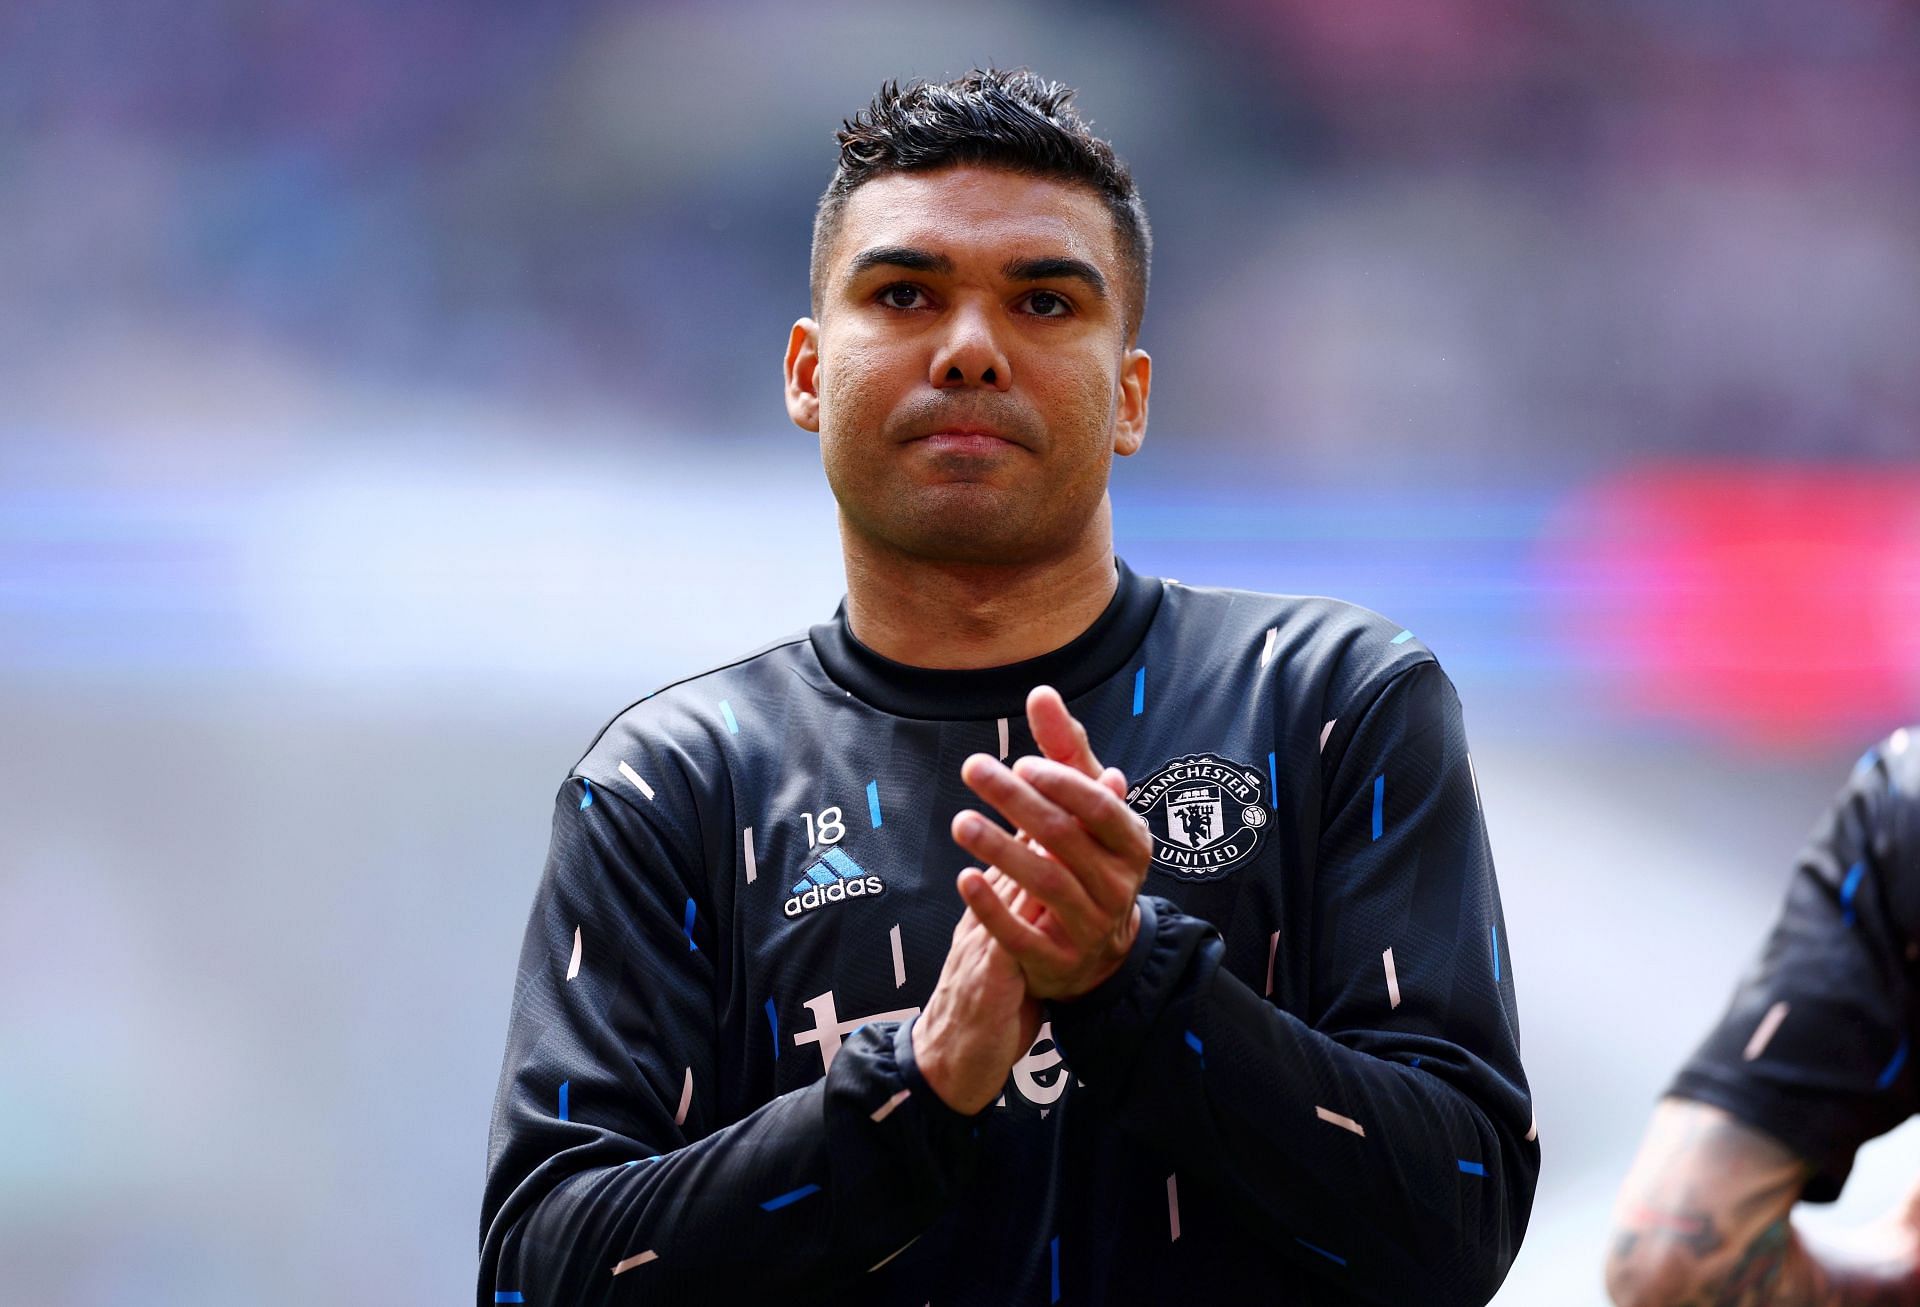 Casemiro has impressed in his debut season at Manchester United.